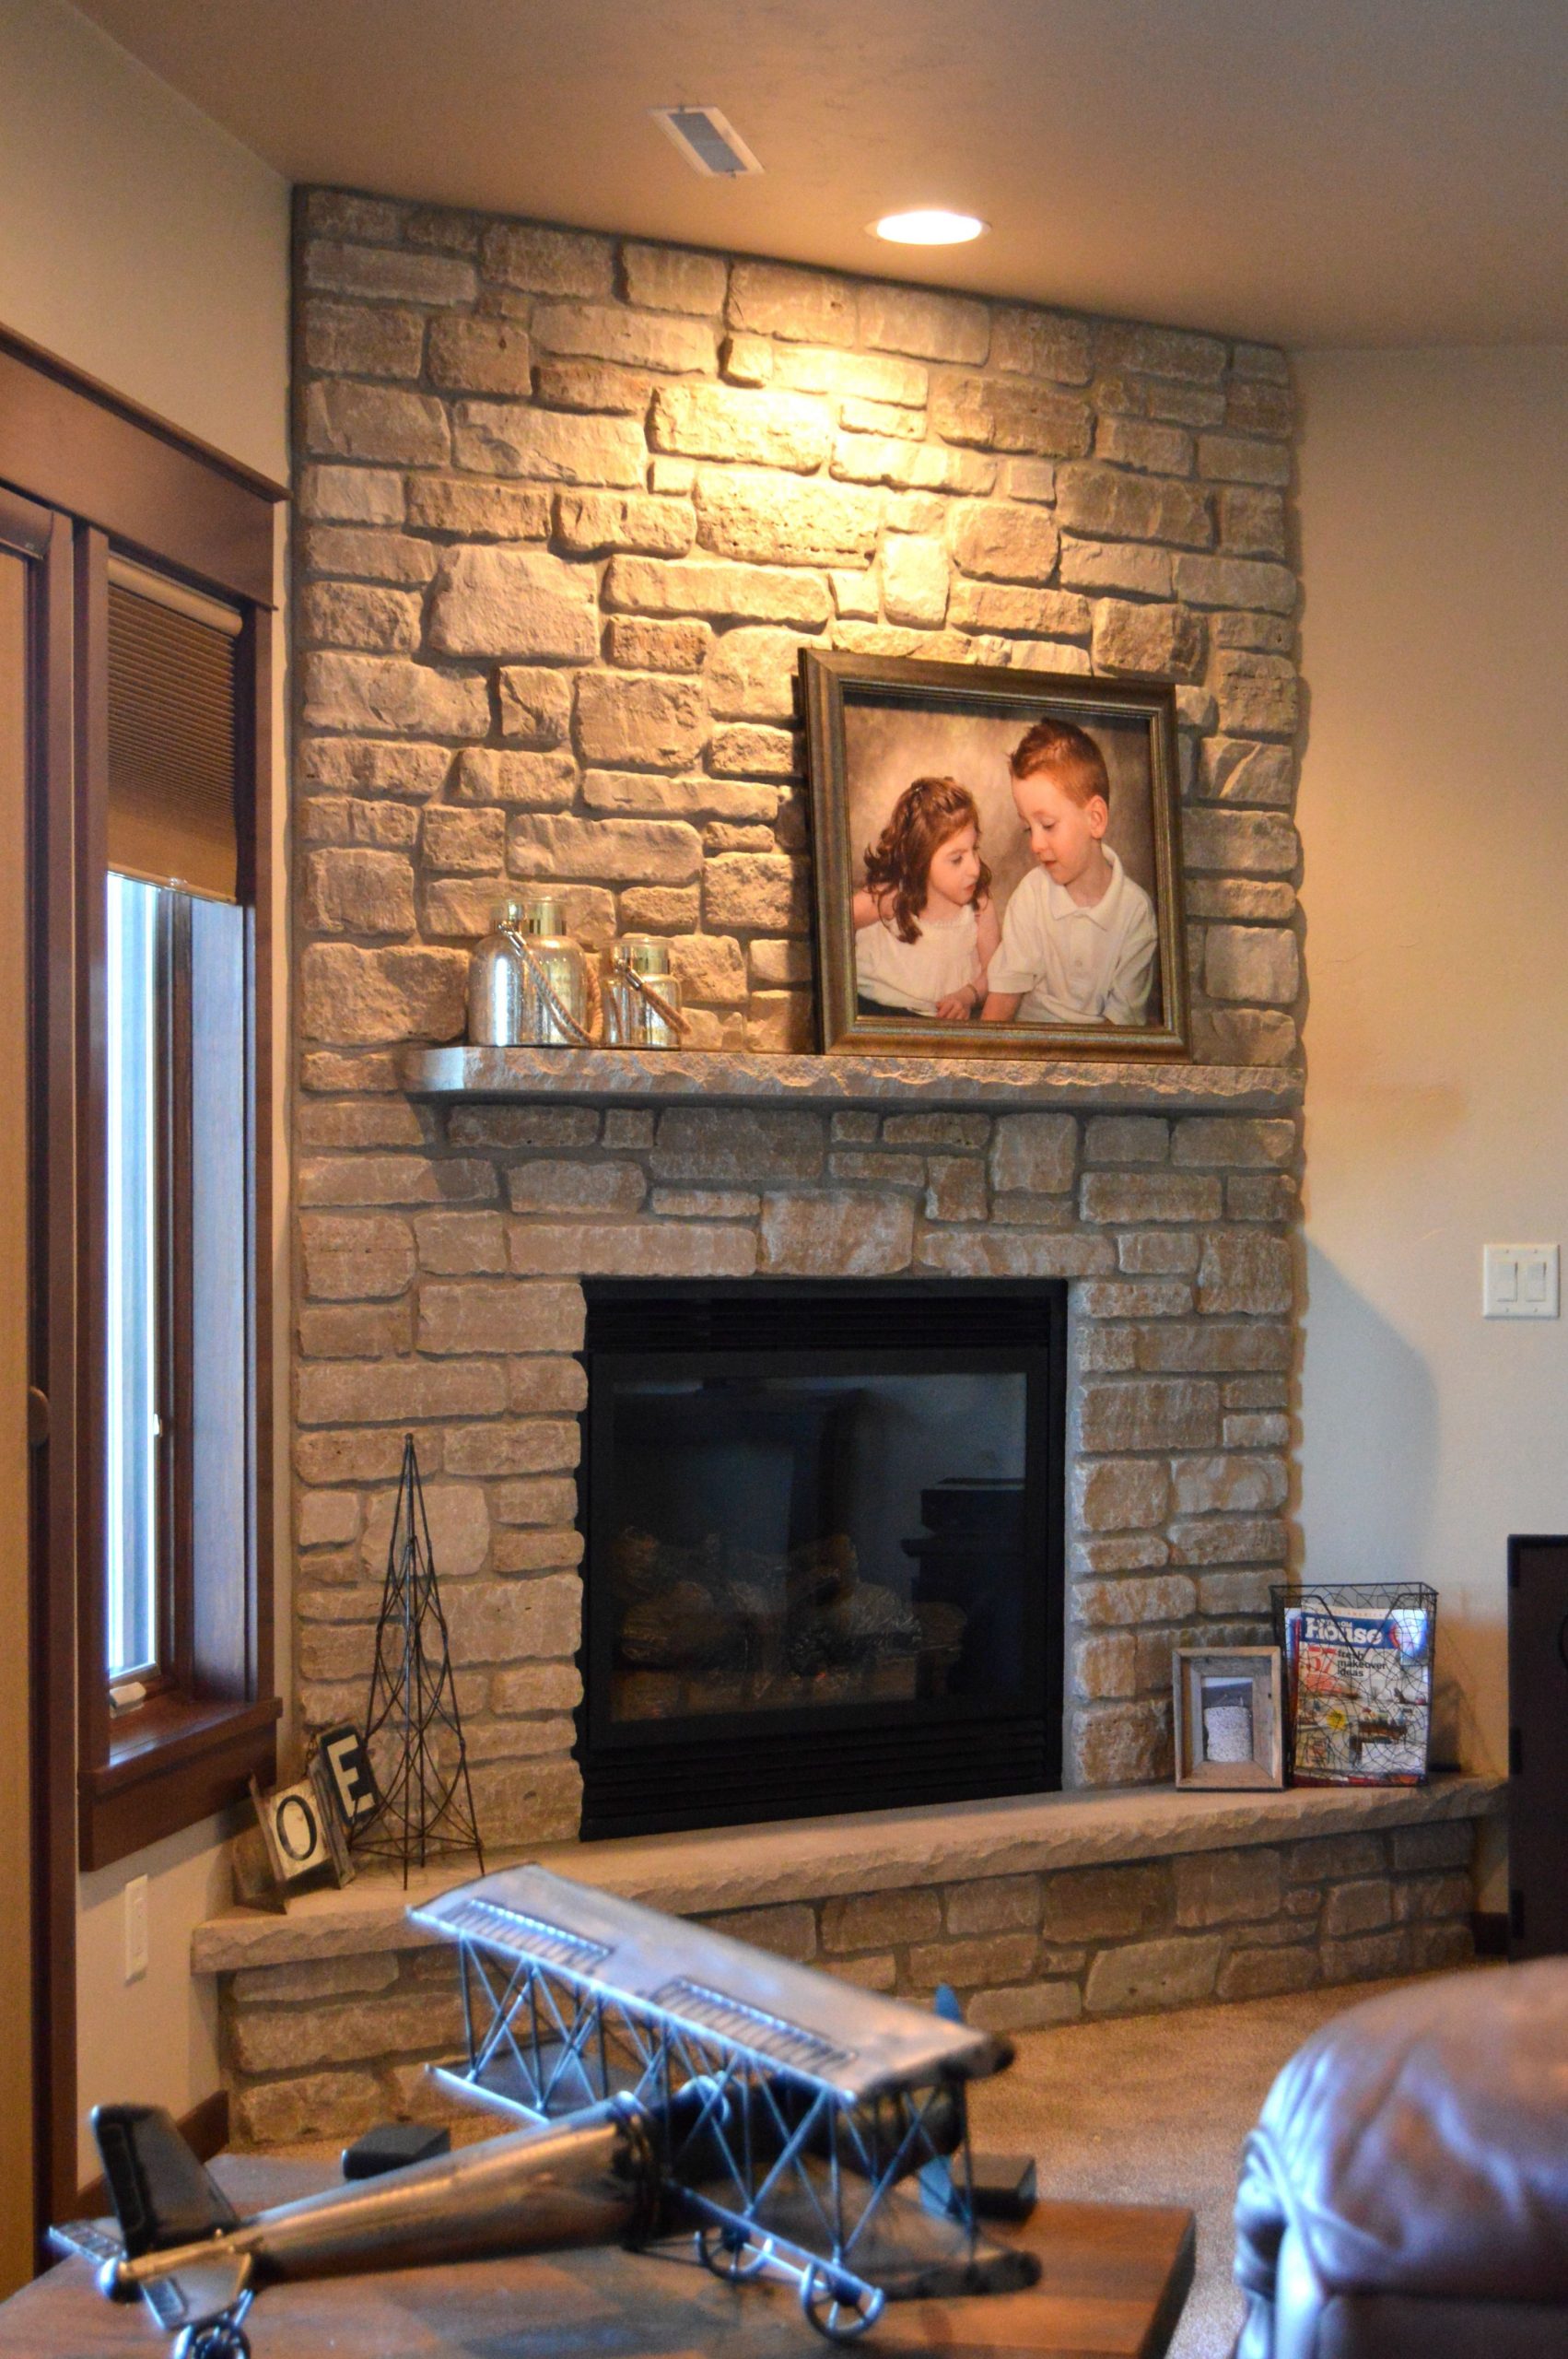 Repair Gas Fireplace New Adding A Fireplace Adding A Fireplace to A House Artificial